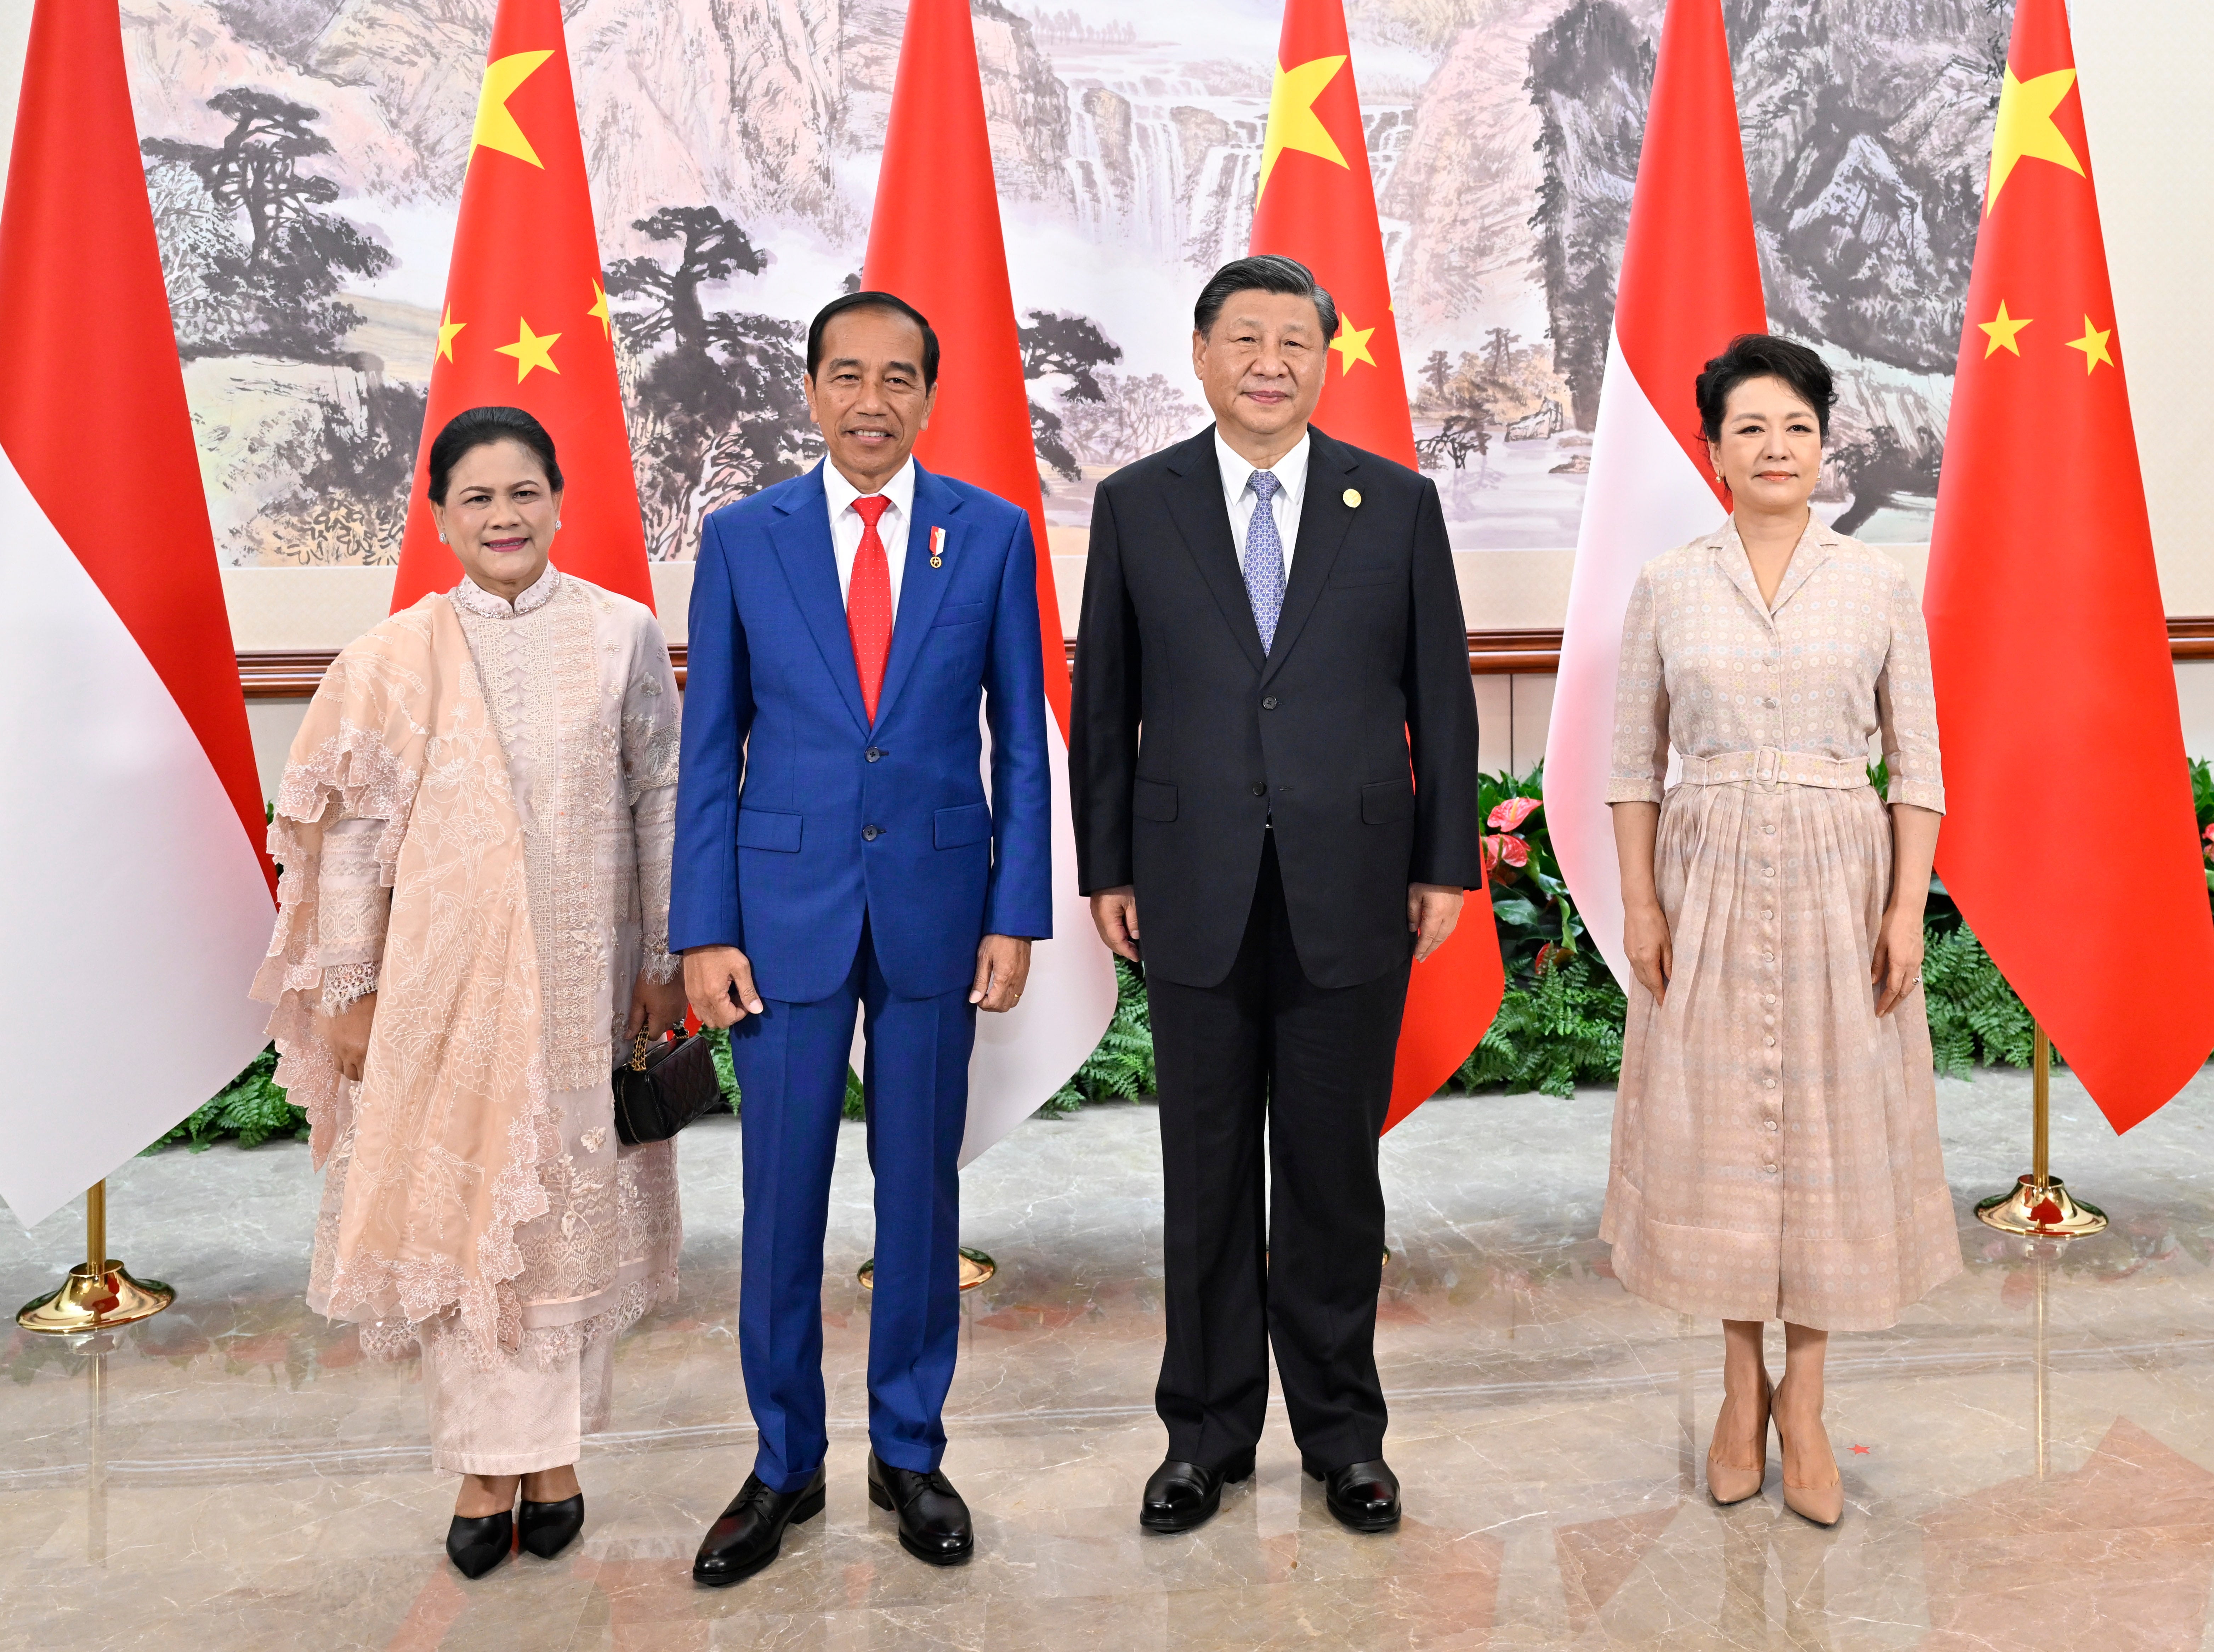 Chinese President Xi Jinping poses for a photo with his Indonesian counterpart Joko Widodo in Chengdu